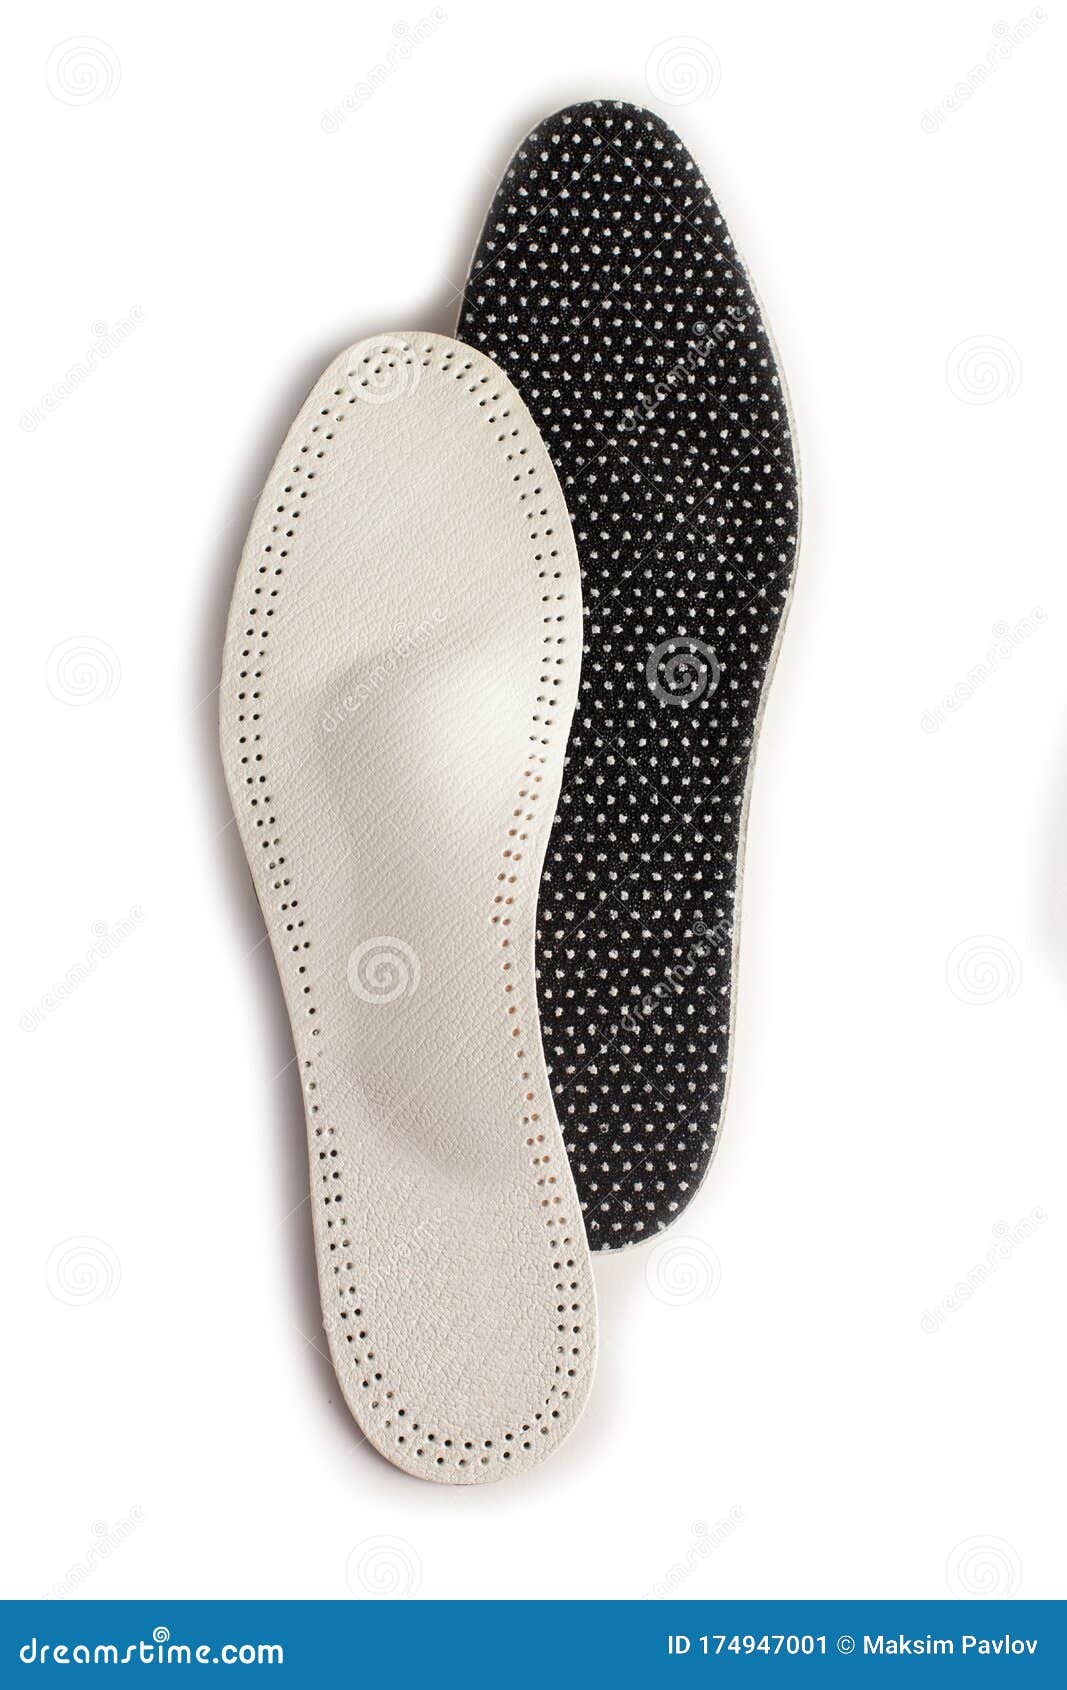 foot care insoles